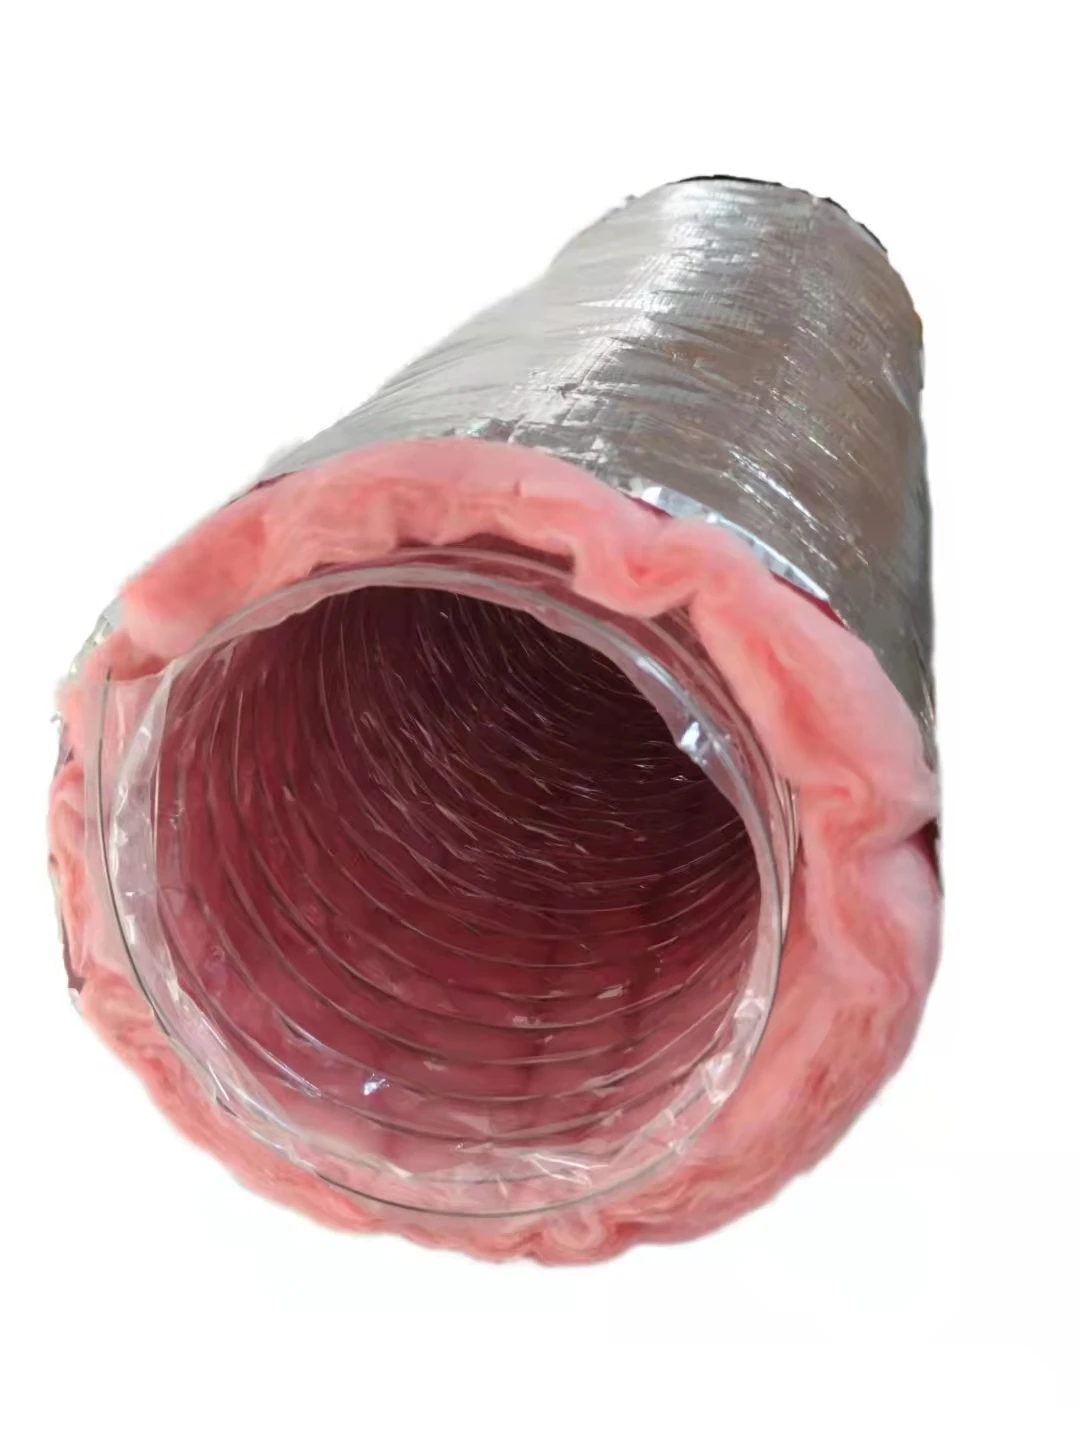 25ft 50ft Flexible Duct All Sizes R4r6r8 Flex Duct Insulated Fabric Duct Buy Home Hvac 3208